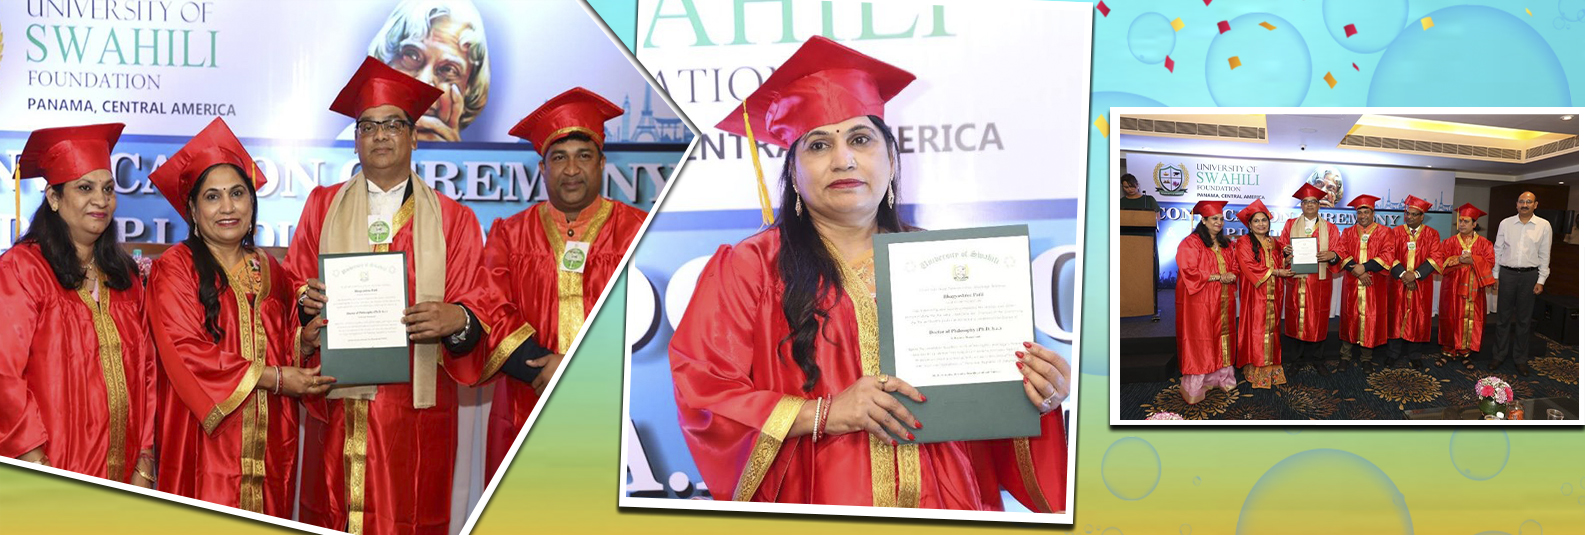 Dr. Bhagyashree Patil, Vice Chairperson Doctorate Degree